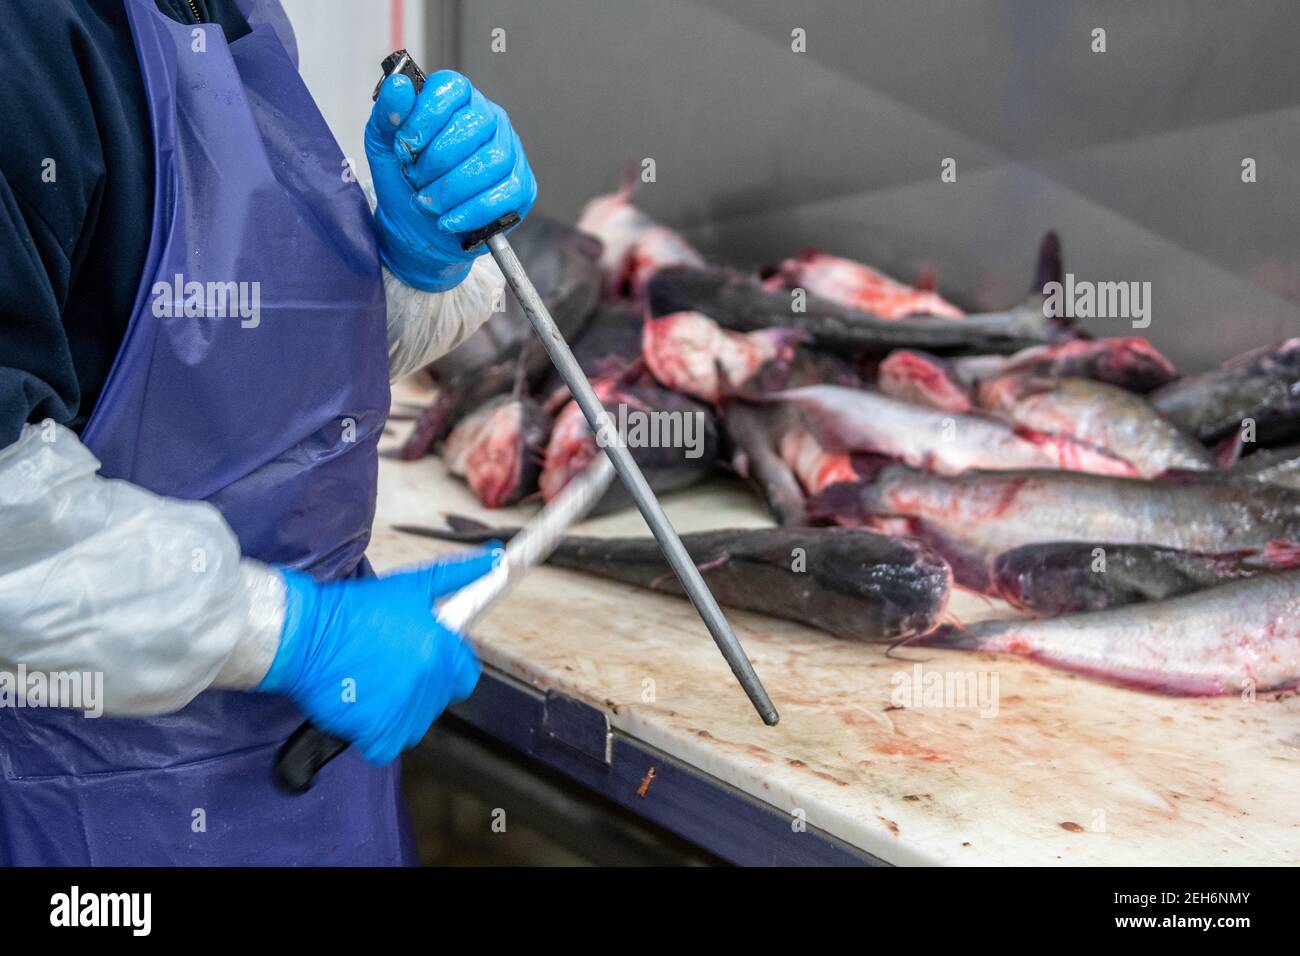 Worker sharpening knives at seafood packing plant, Jessup, MD Stock Photo